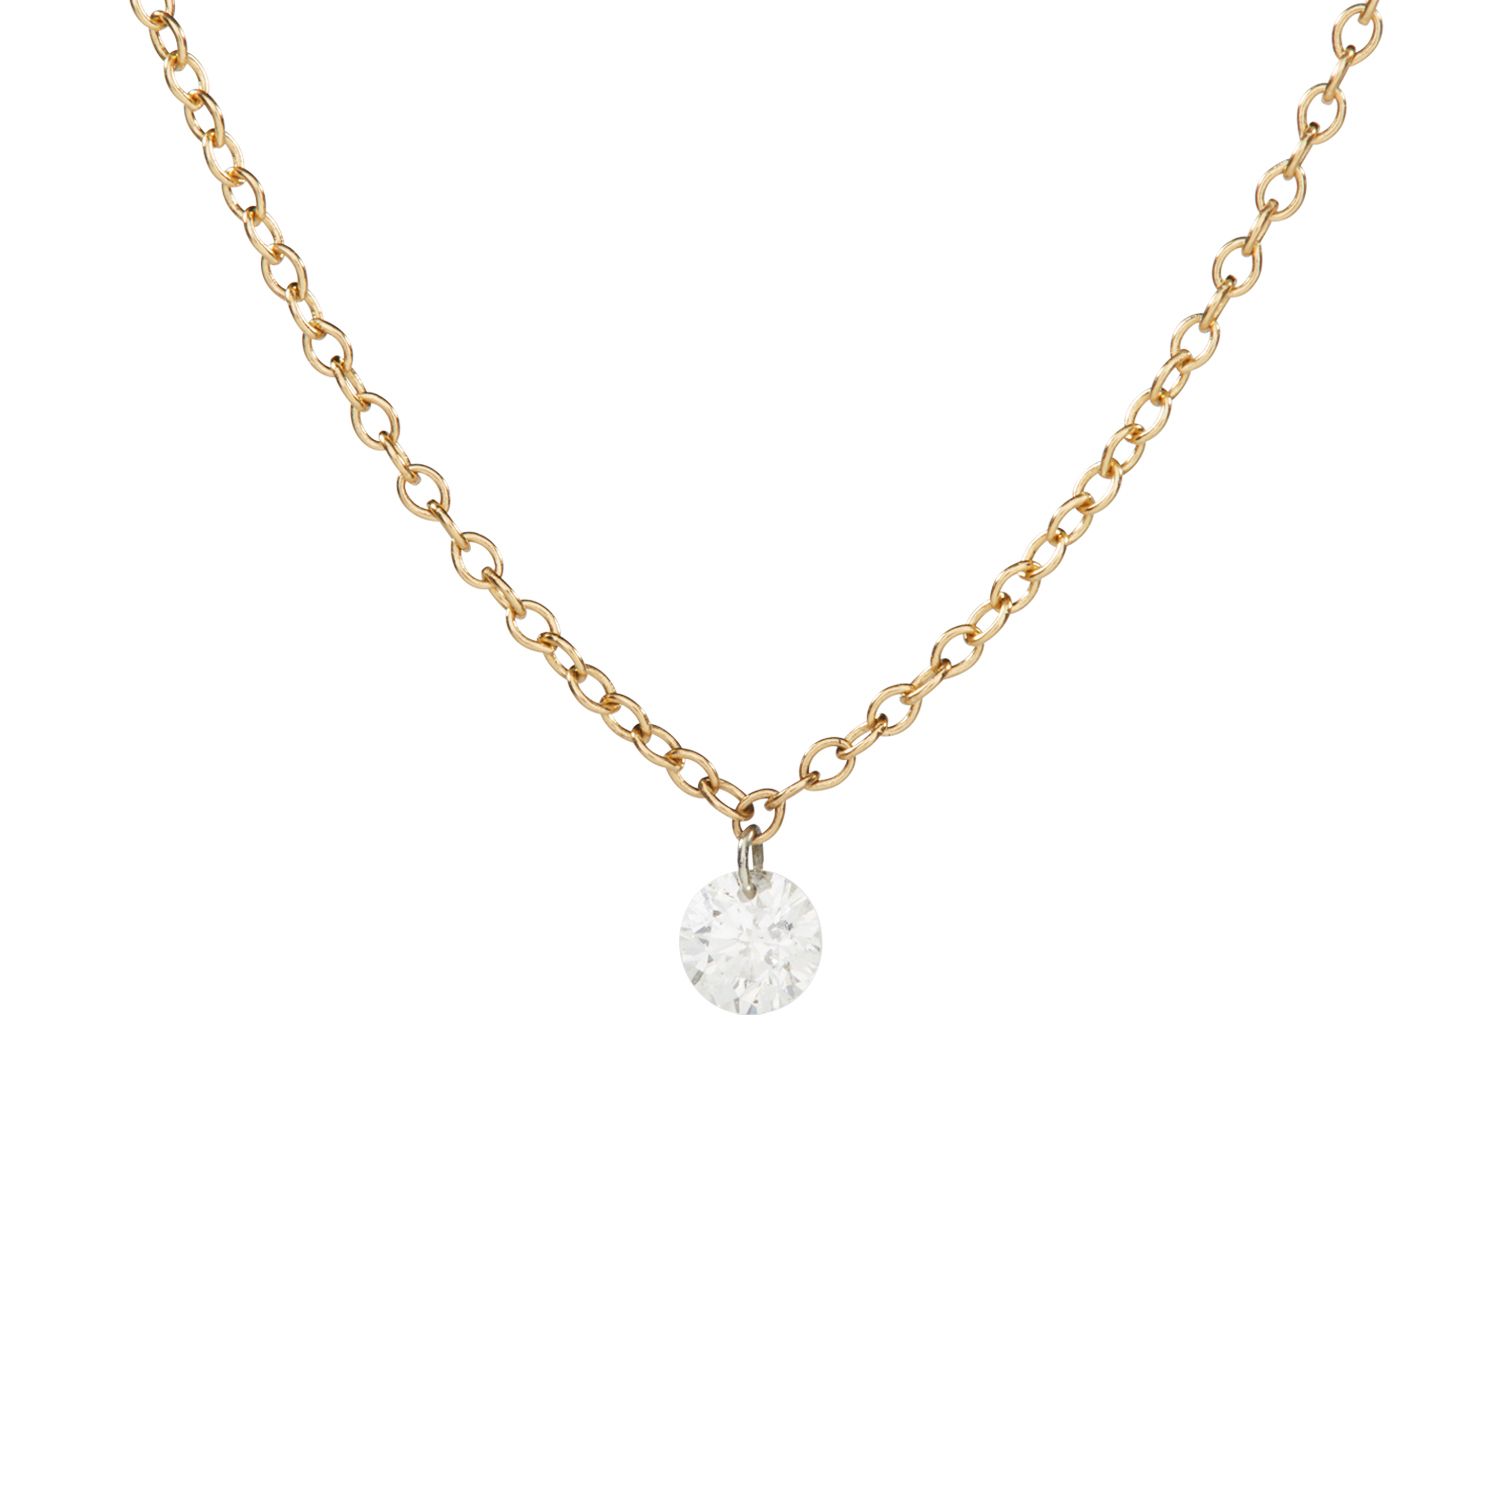 Diamond Pinprick Necklace, Yellow Gold For Newest Small Diamond Necklaces (View 10 of 25)